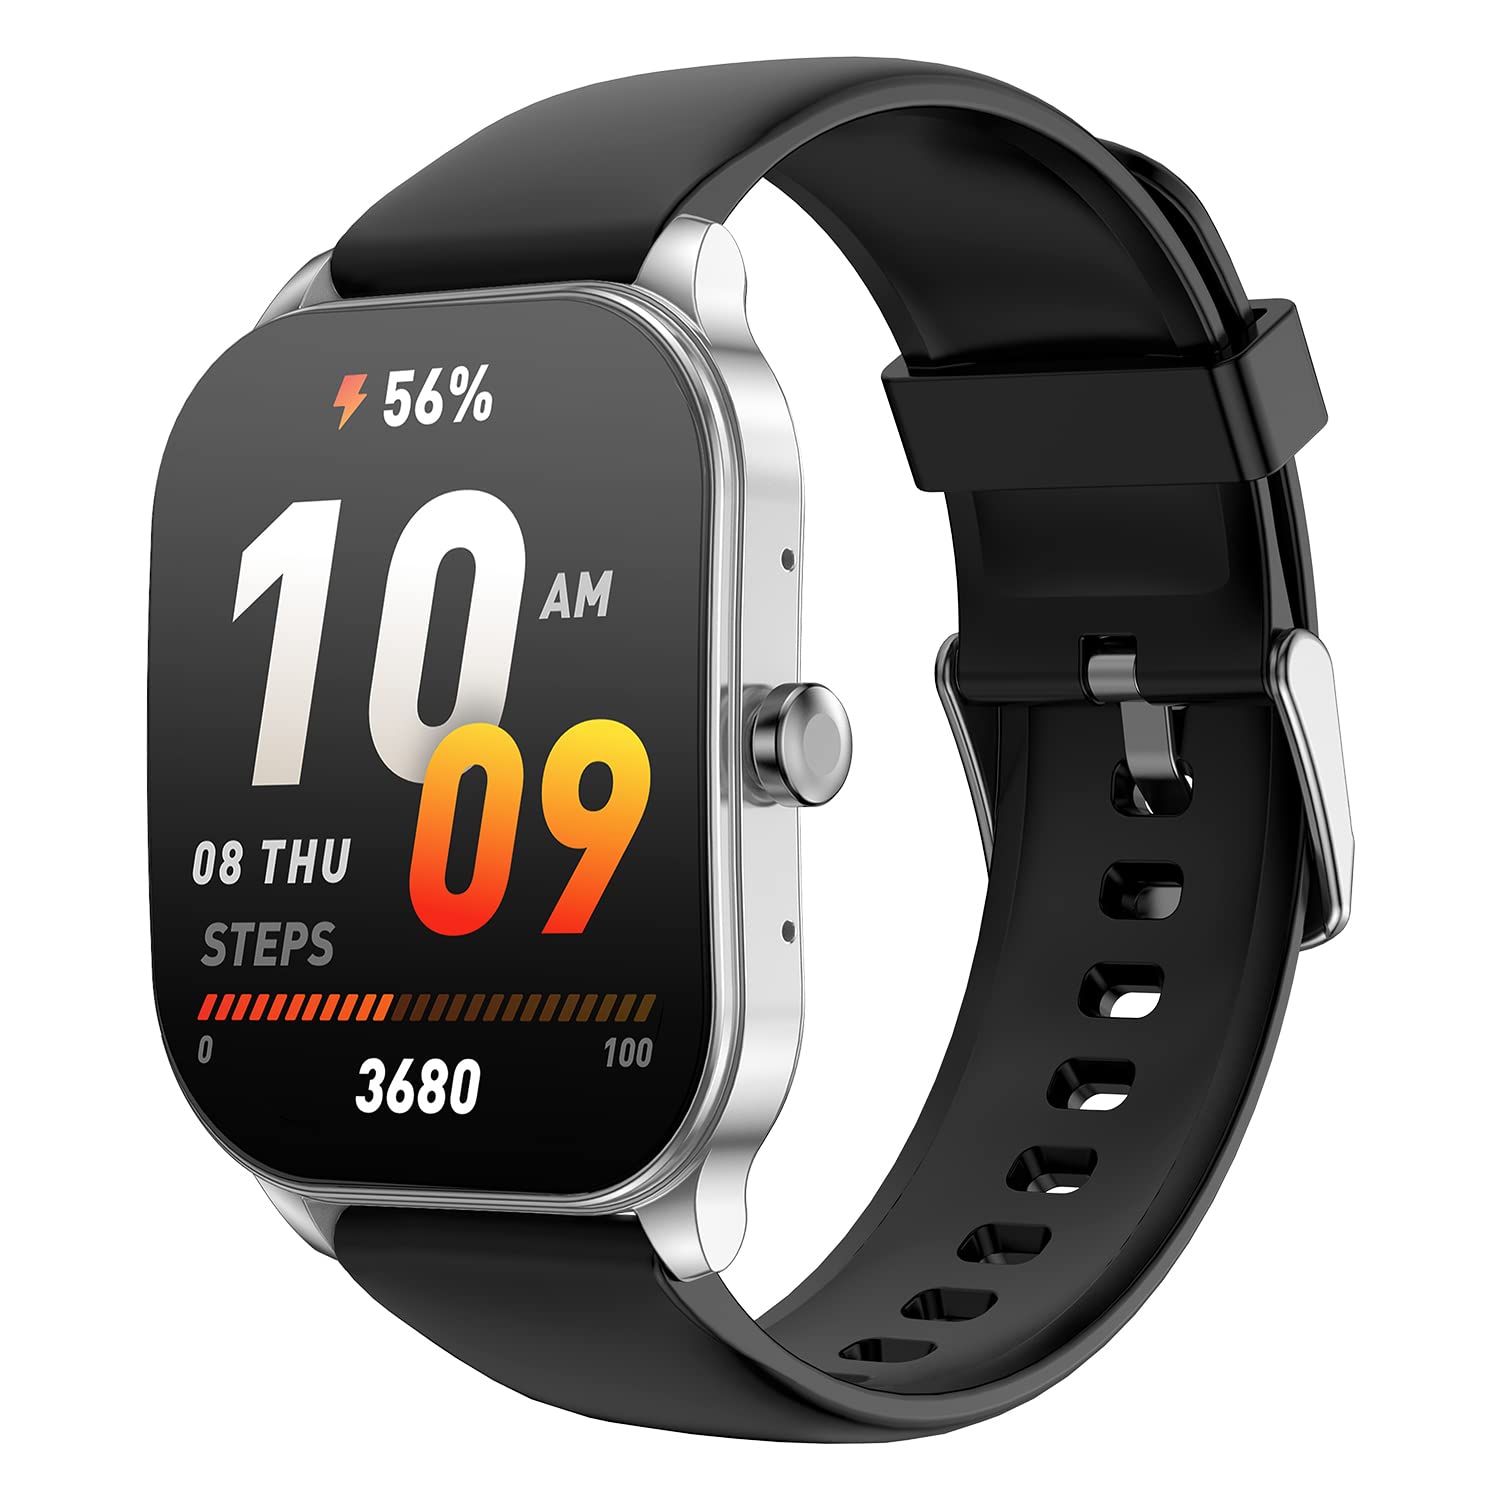 Amazfit Pop 3S Smart Watch with 1.96" AMOLED Display, Bluetooth Calling, SpO2, 12-Day Battery Life, AI Voice Assistance, 100 Sports Modes, 24H HR Monitor, Music Control, Over 100 Watch Faces (Silver)